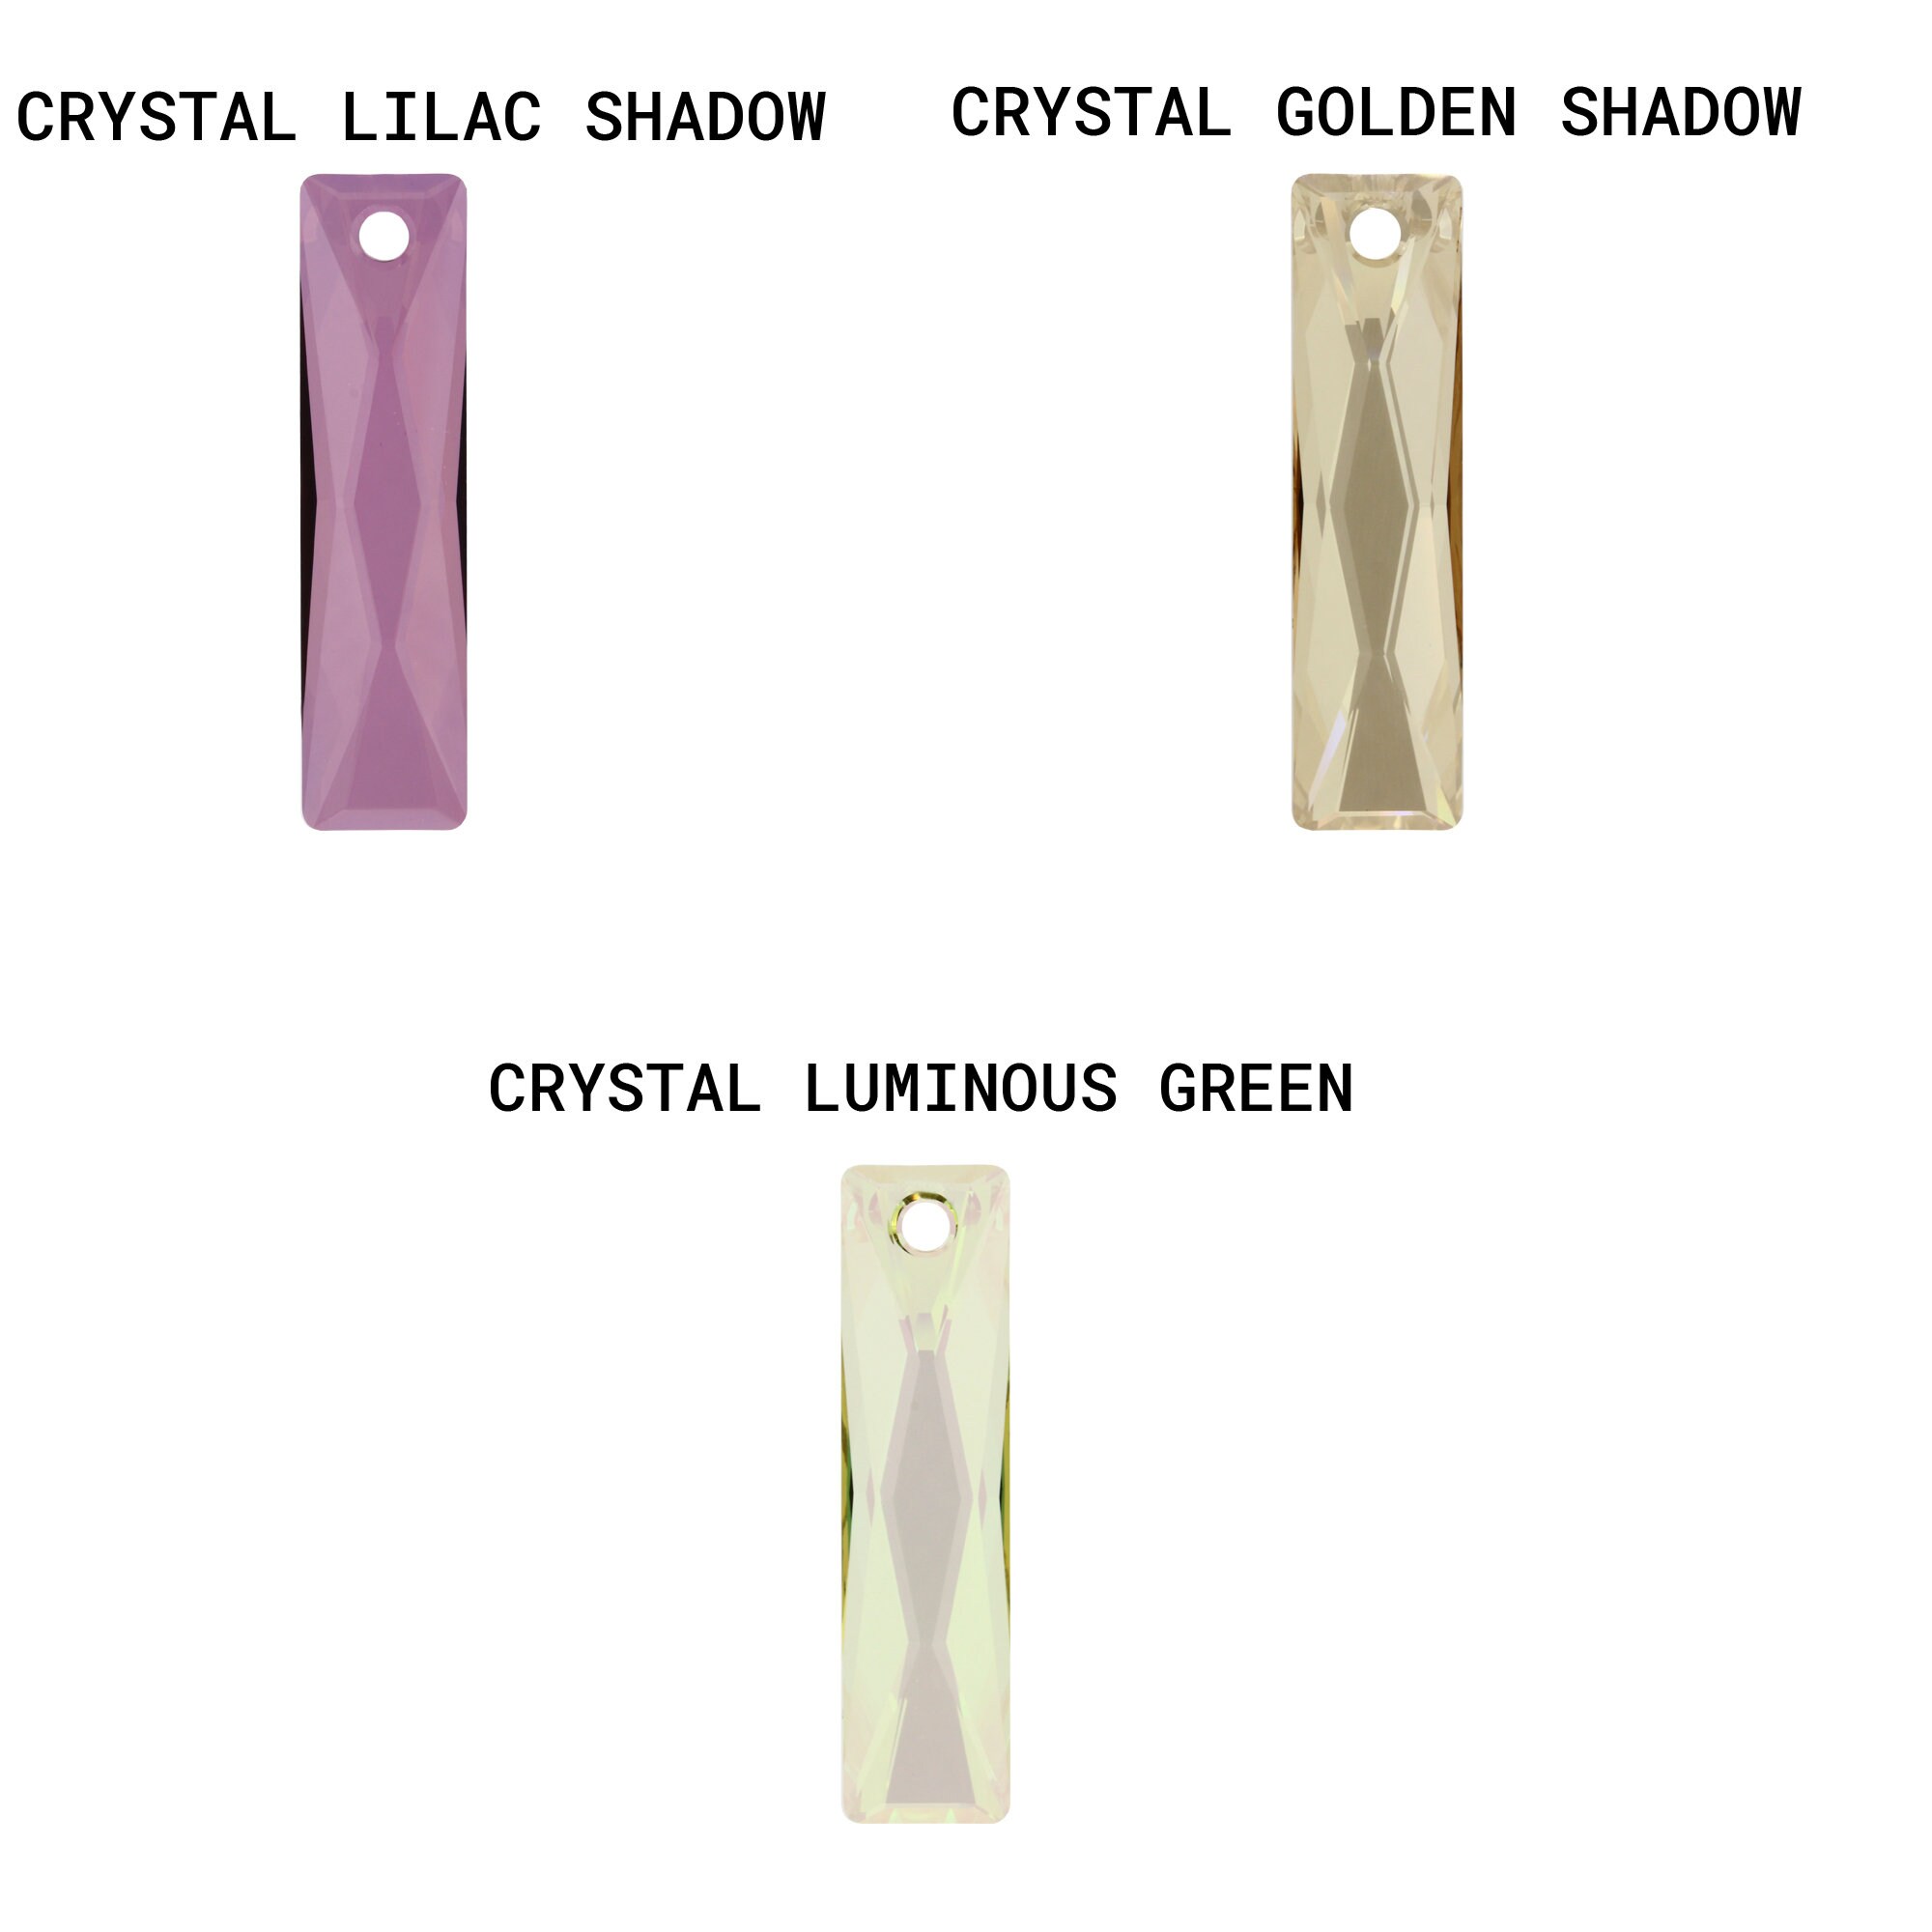 PRIMERO Crystal 6465 Queen Baguette Pendants Many Colors Available in  13.5x6mm, 25x7mm and 38x10mm Sizes 